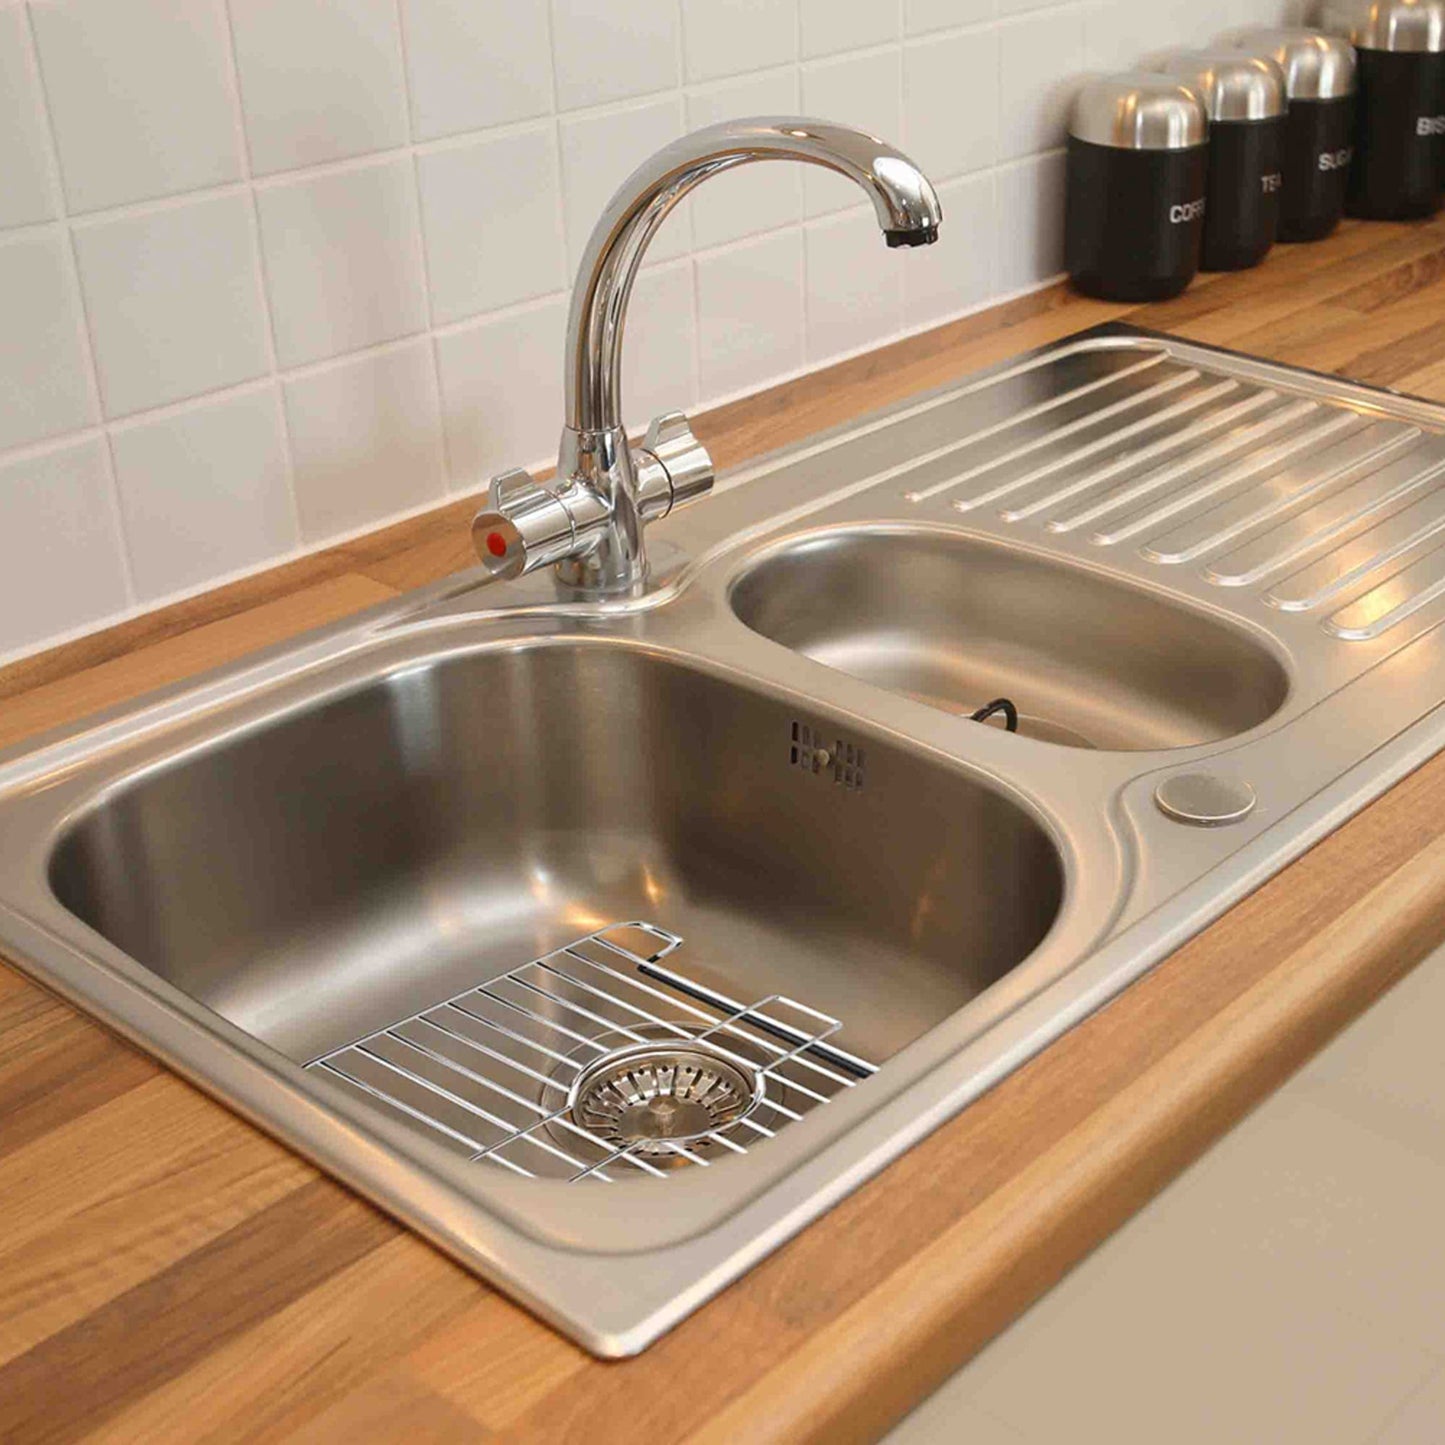 Small Rubber Coated Chrome Plated Steel Sink Protector